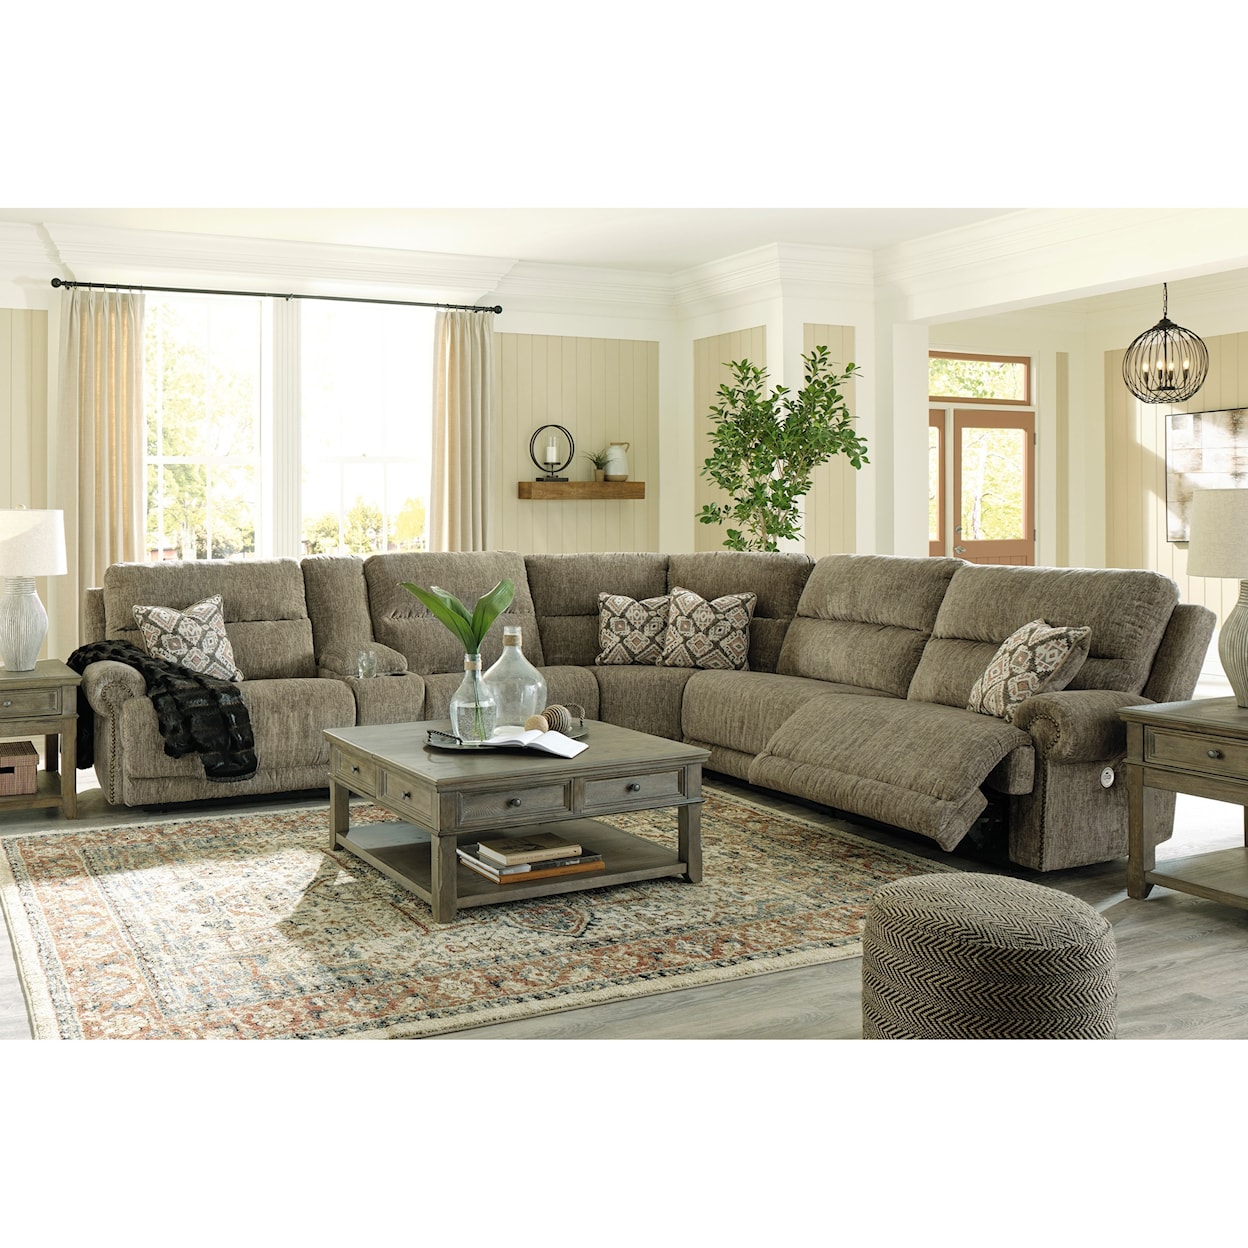 Signature Design by Ashley Lubec Power Reclining Sectional